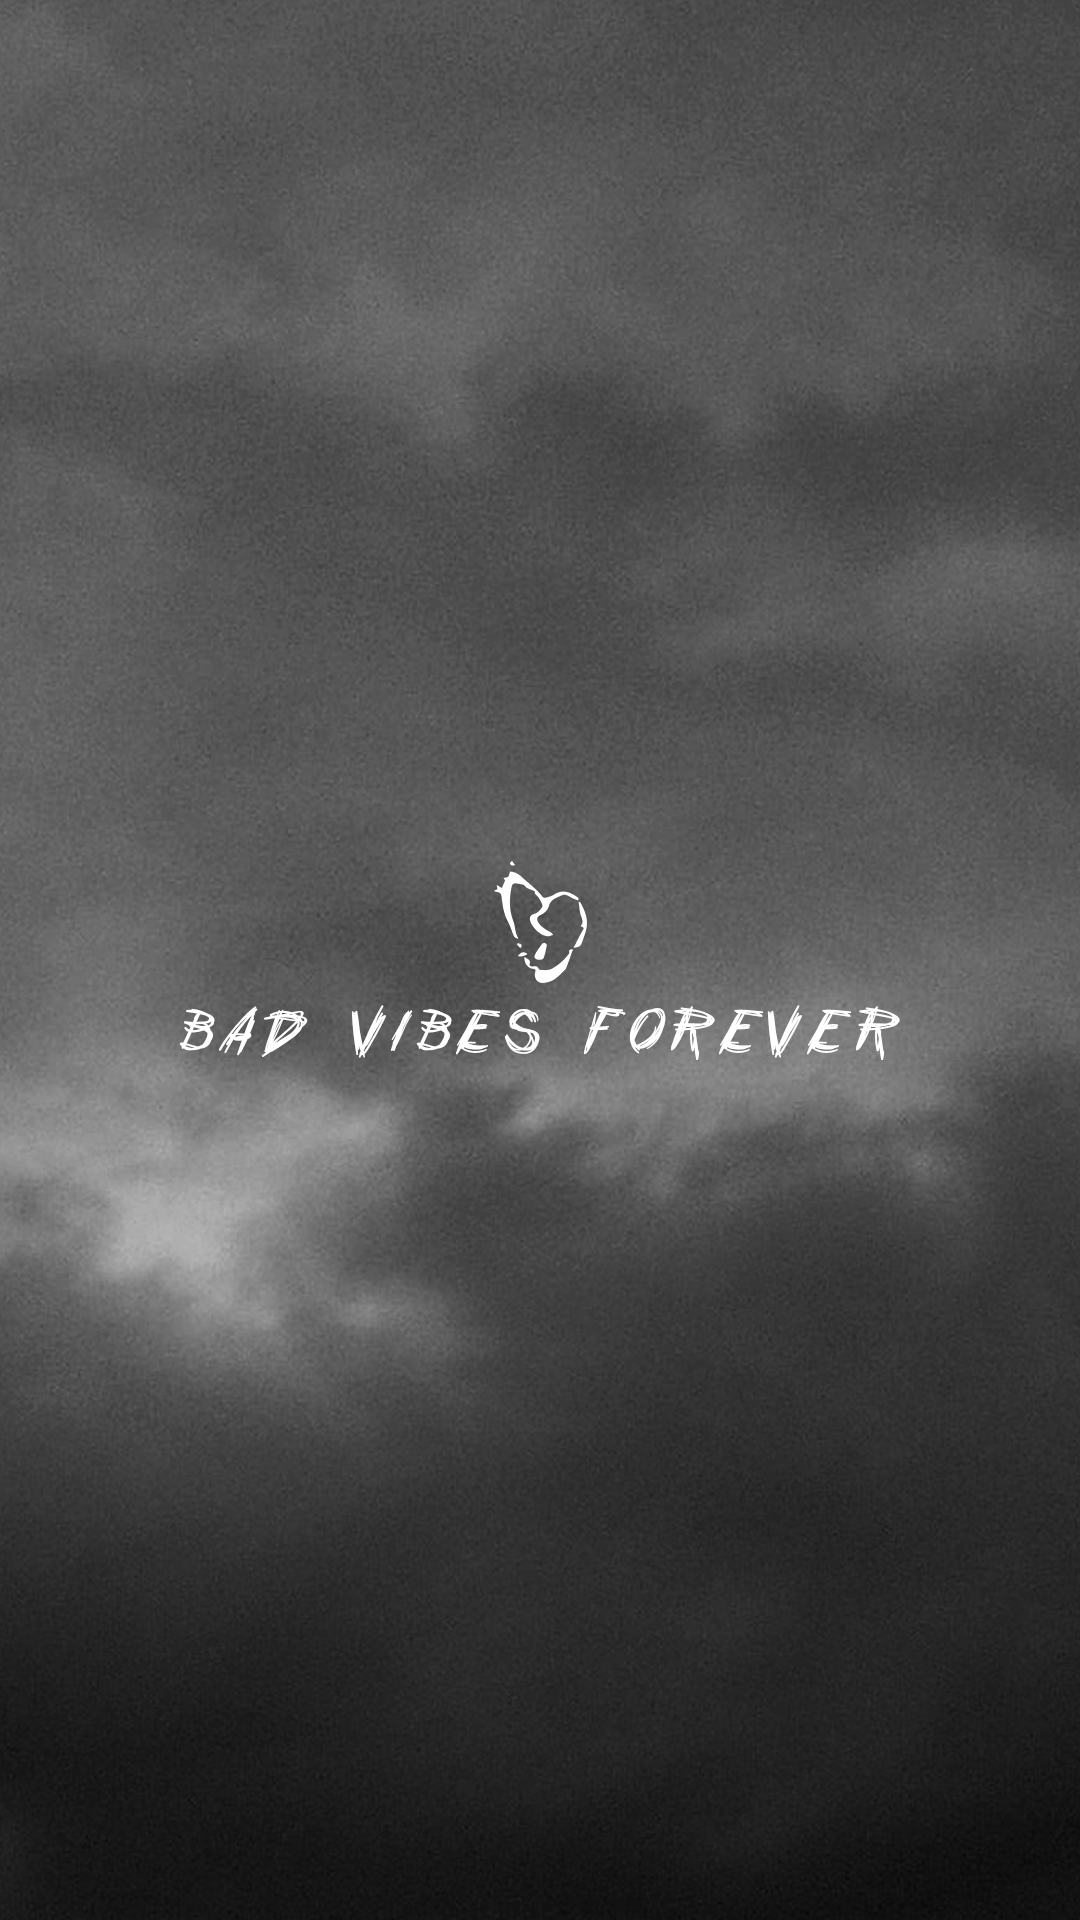 Bad Vibes Forever wallpaper Made by Me  rhiphopwallpapers